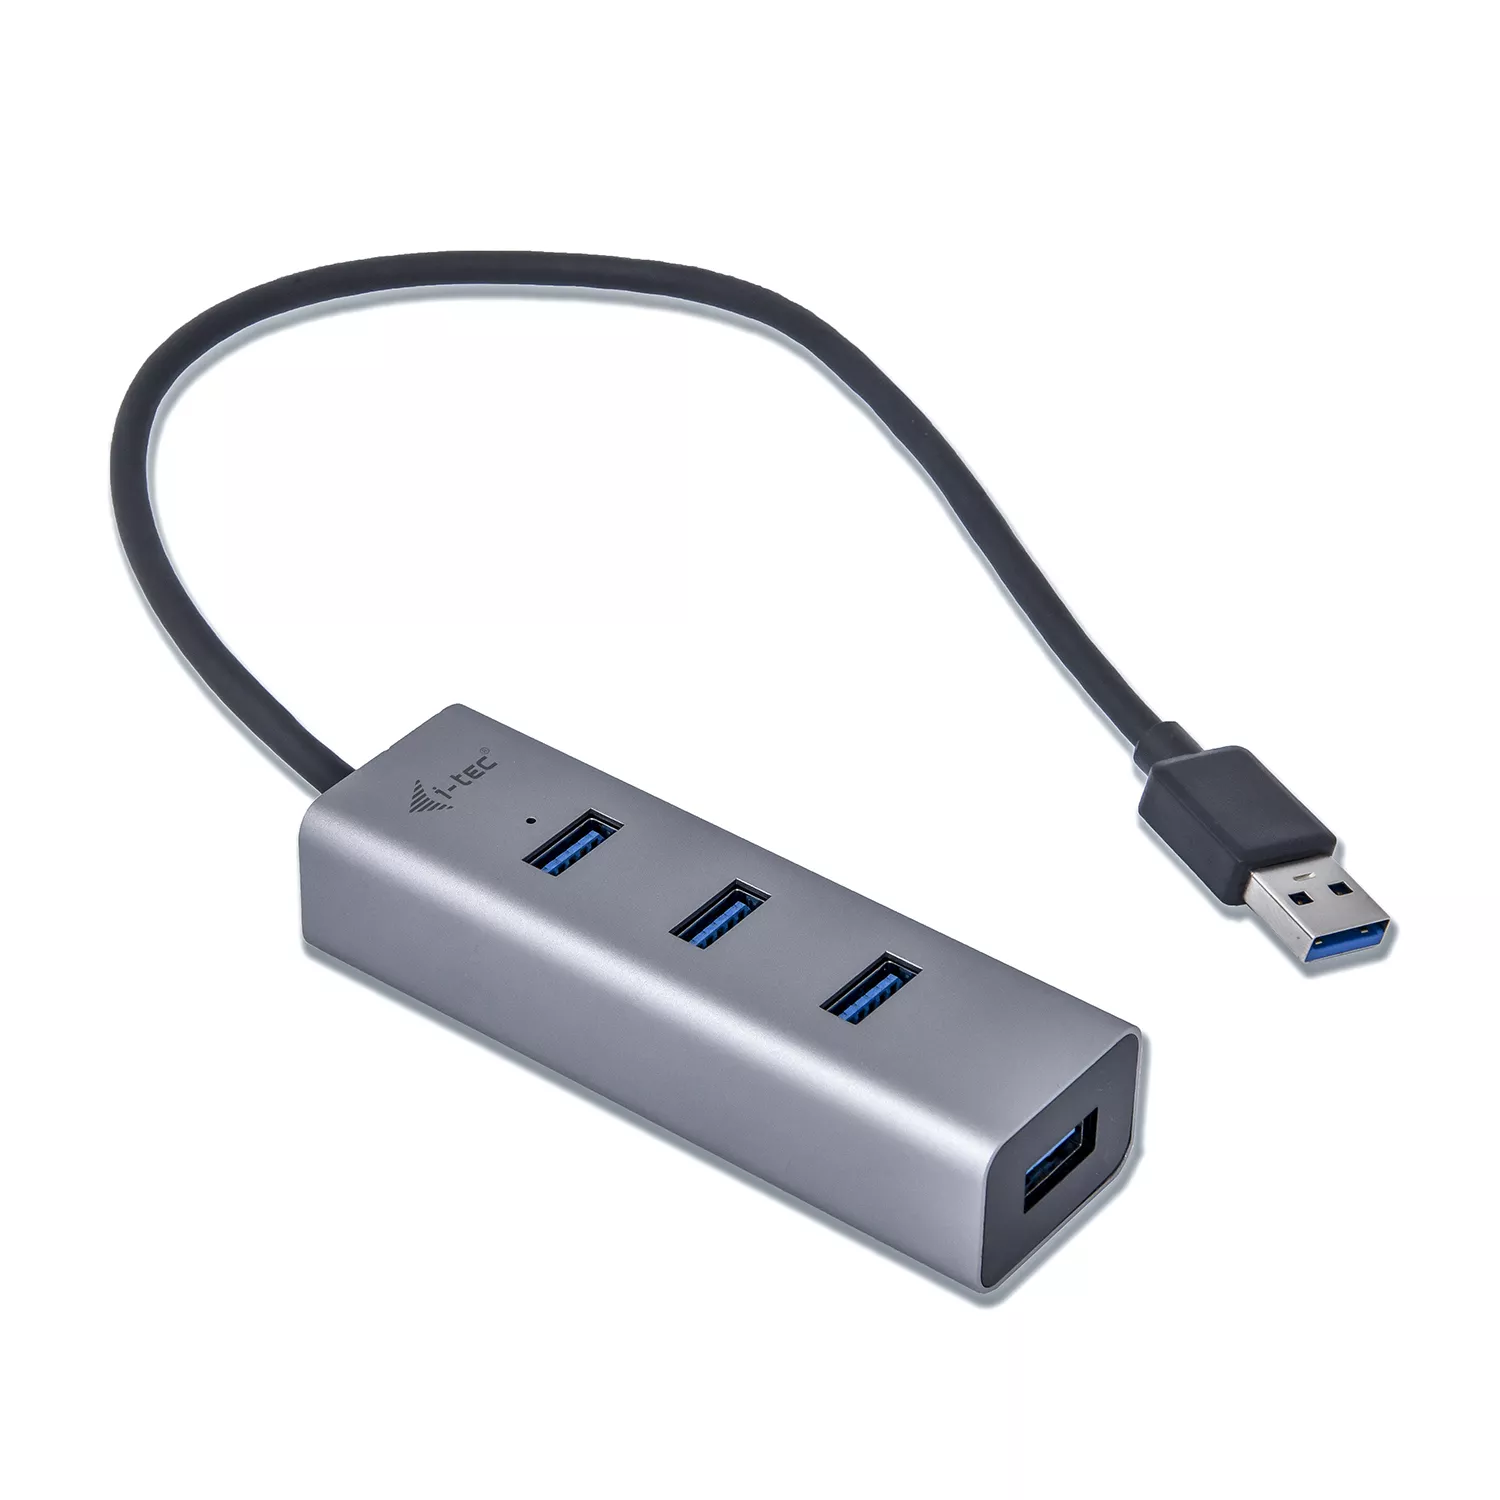 Achat Switchs et Hubs I-TEC USB 3.0 Metal HUB 4 port without power adapter ideal sur hello RSE